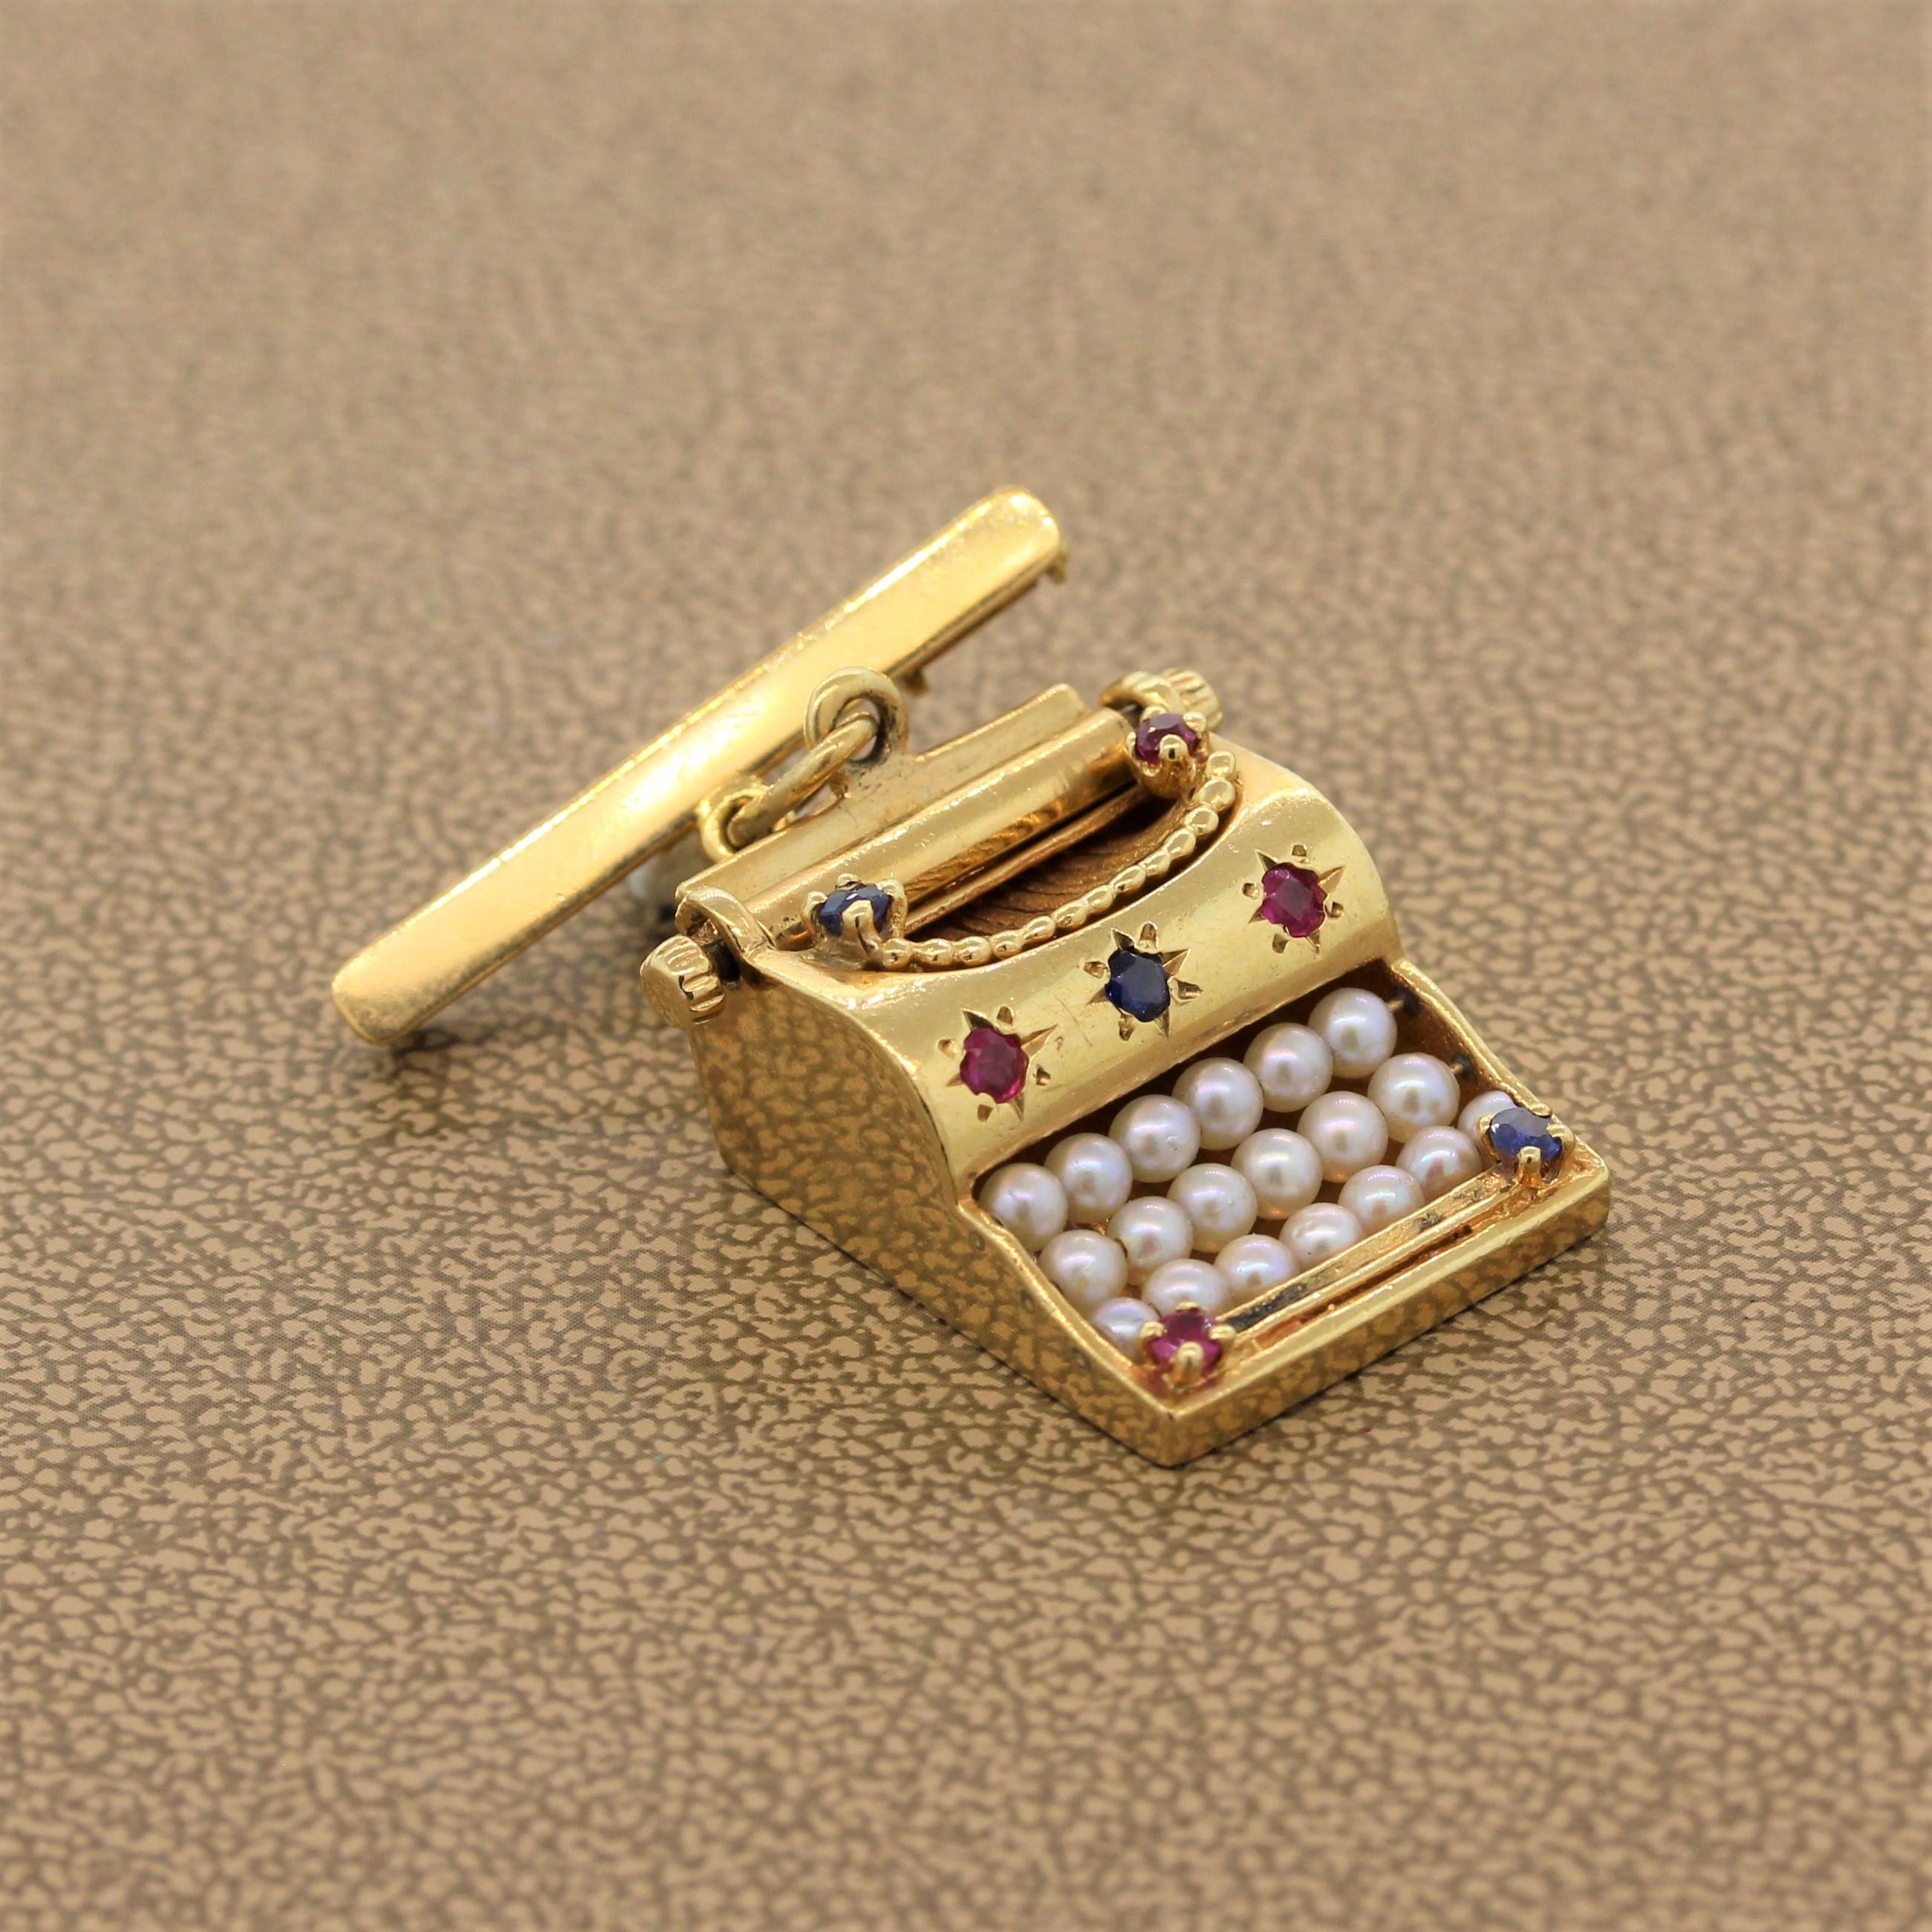 Women's Vintage Seed Pearl Ruby Sapphire Gold Typewriter Brooch Charm